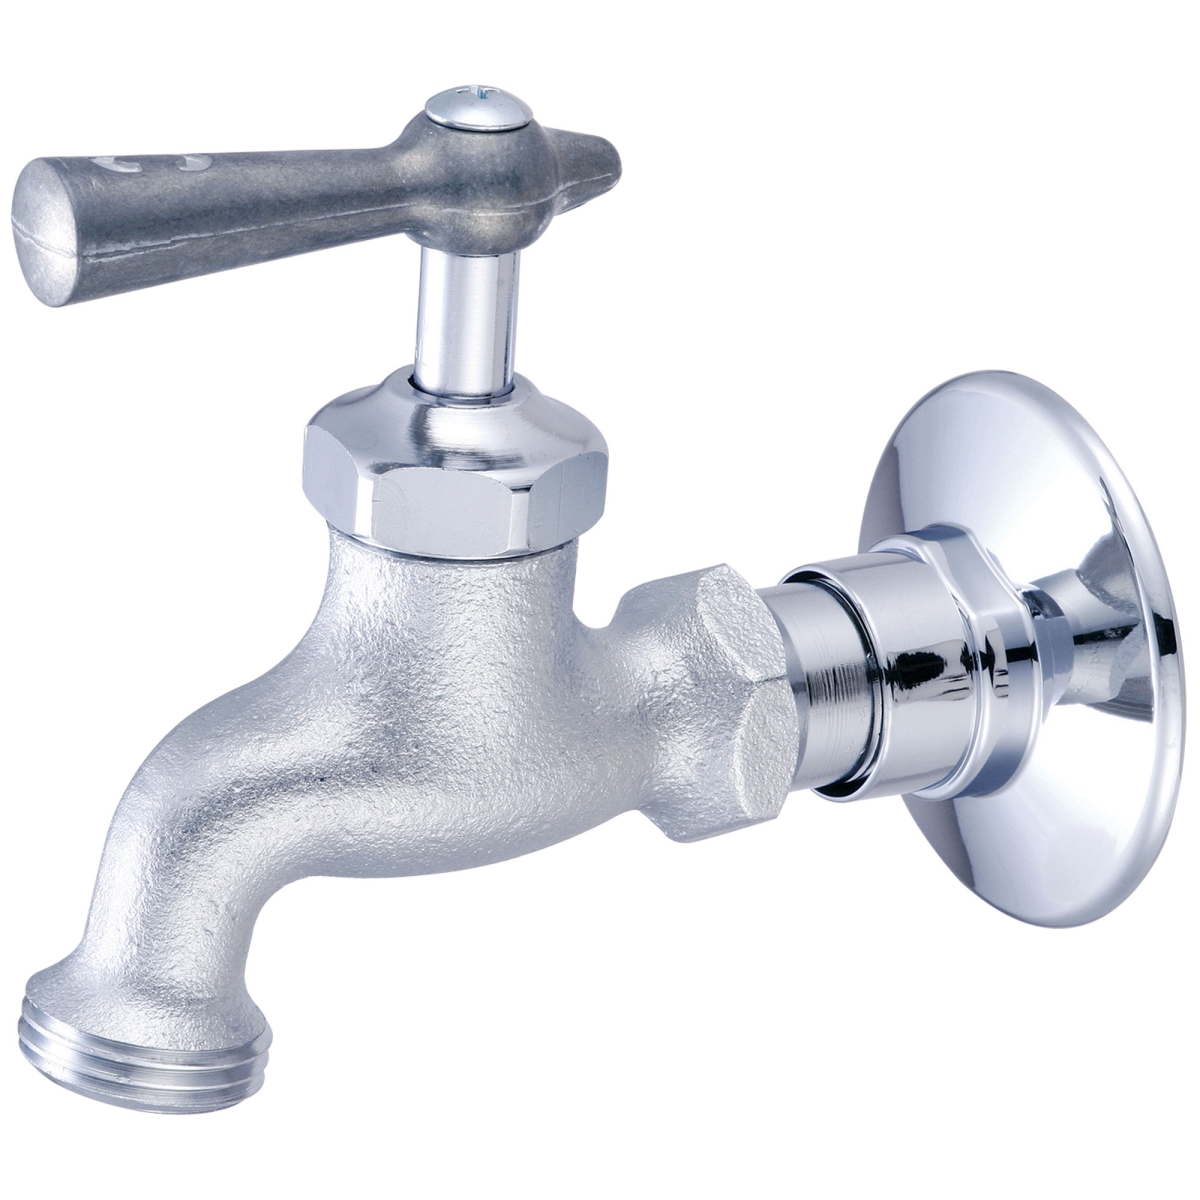 UPC 763439000040 product image for 0006-H1-2C Single Handle Wall Mount Faucet, Rough Chrome | upcitemdb.com